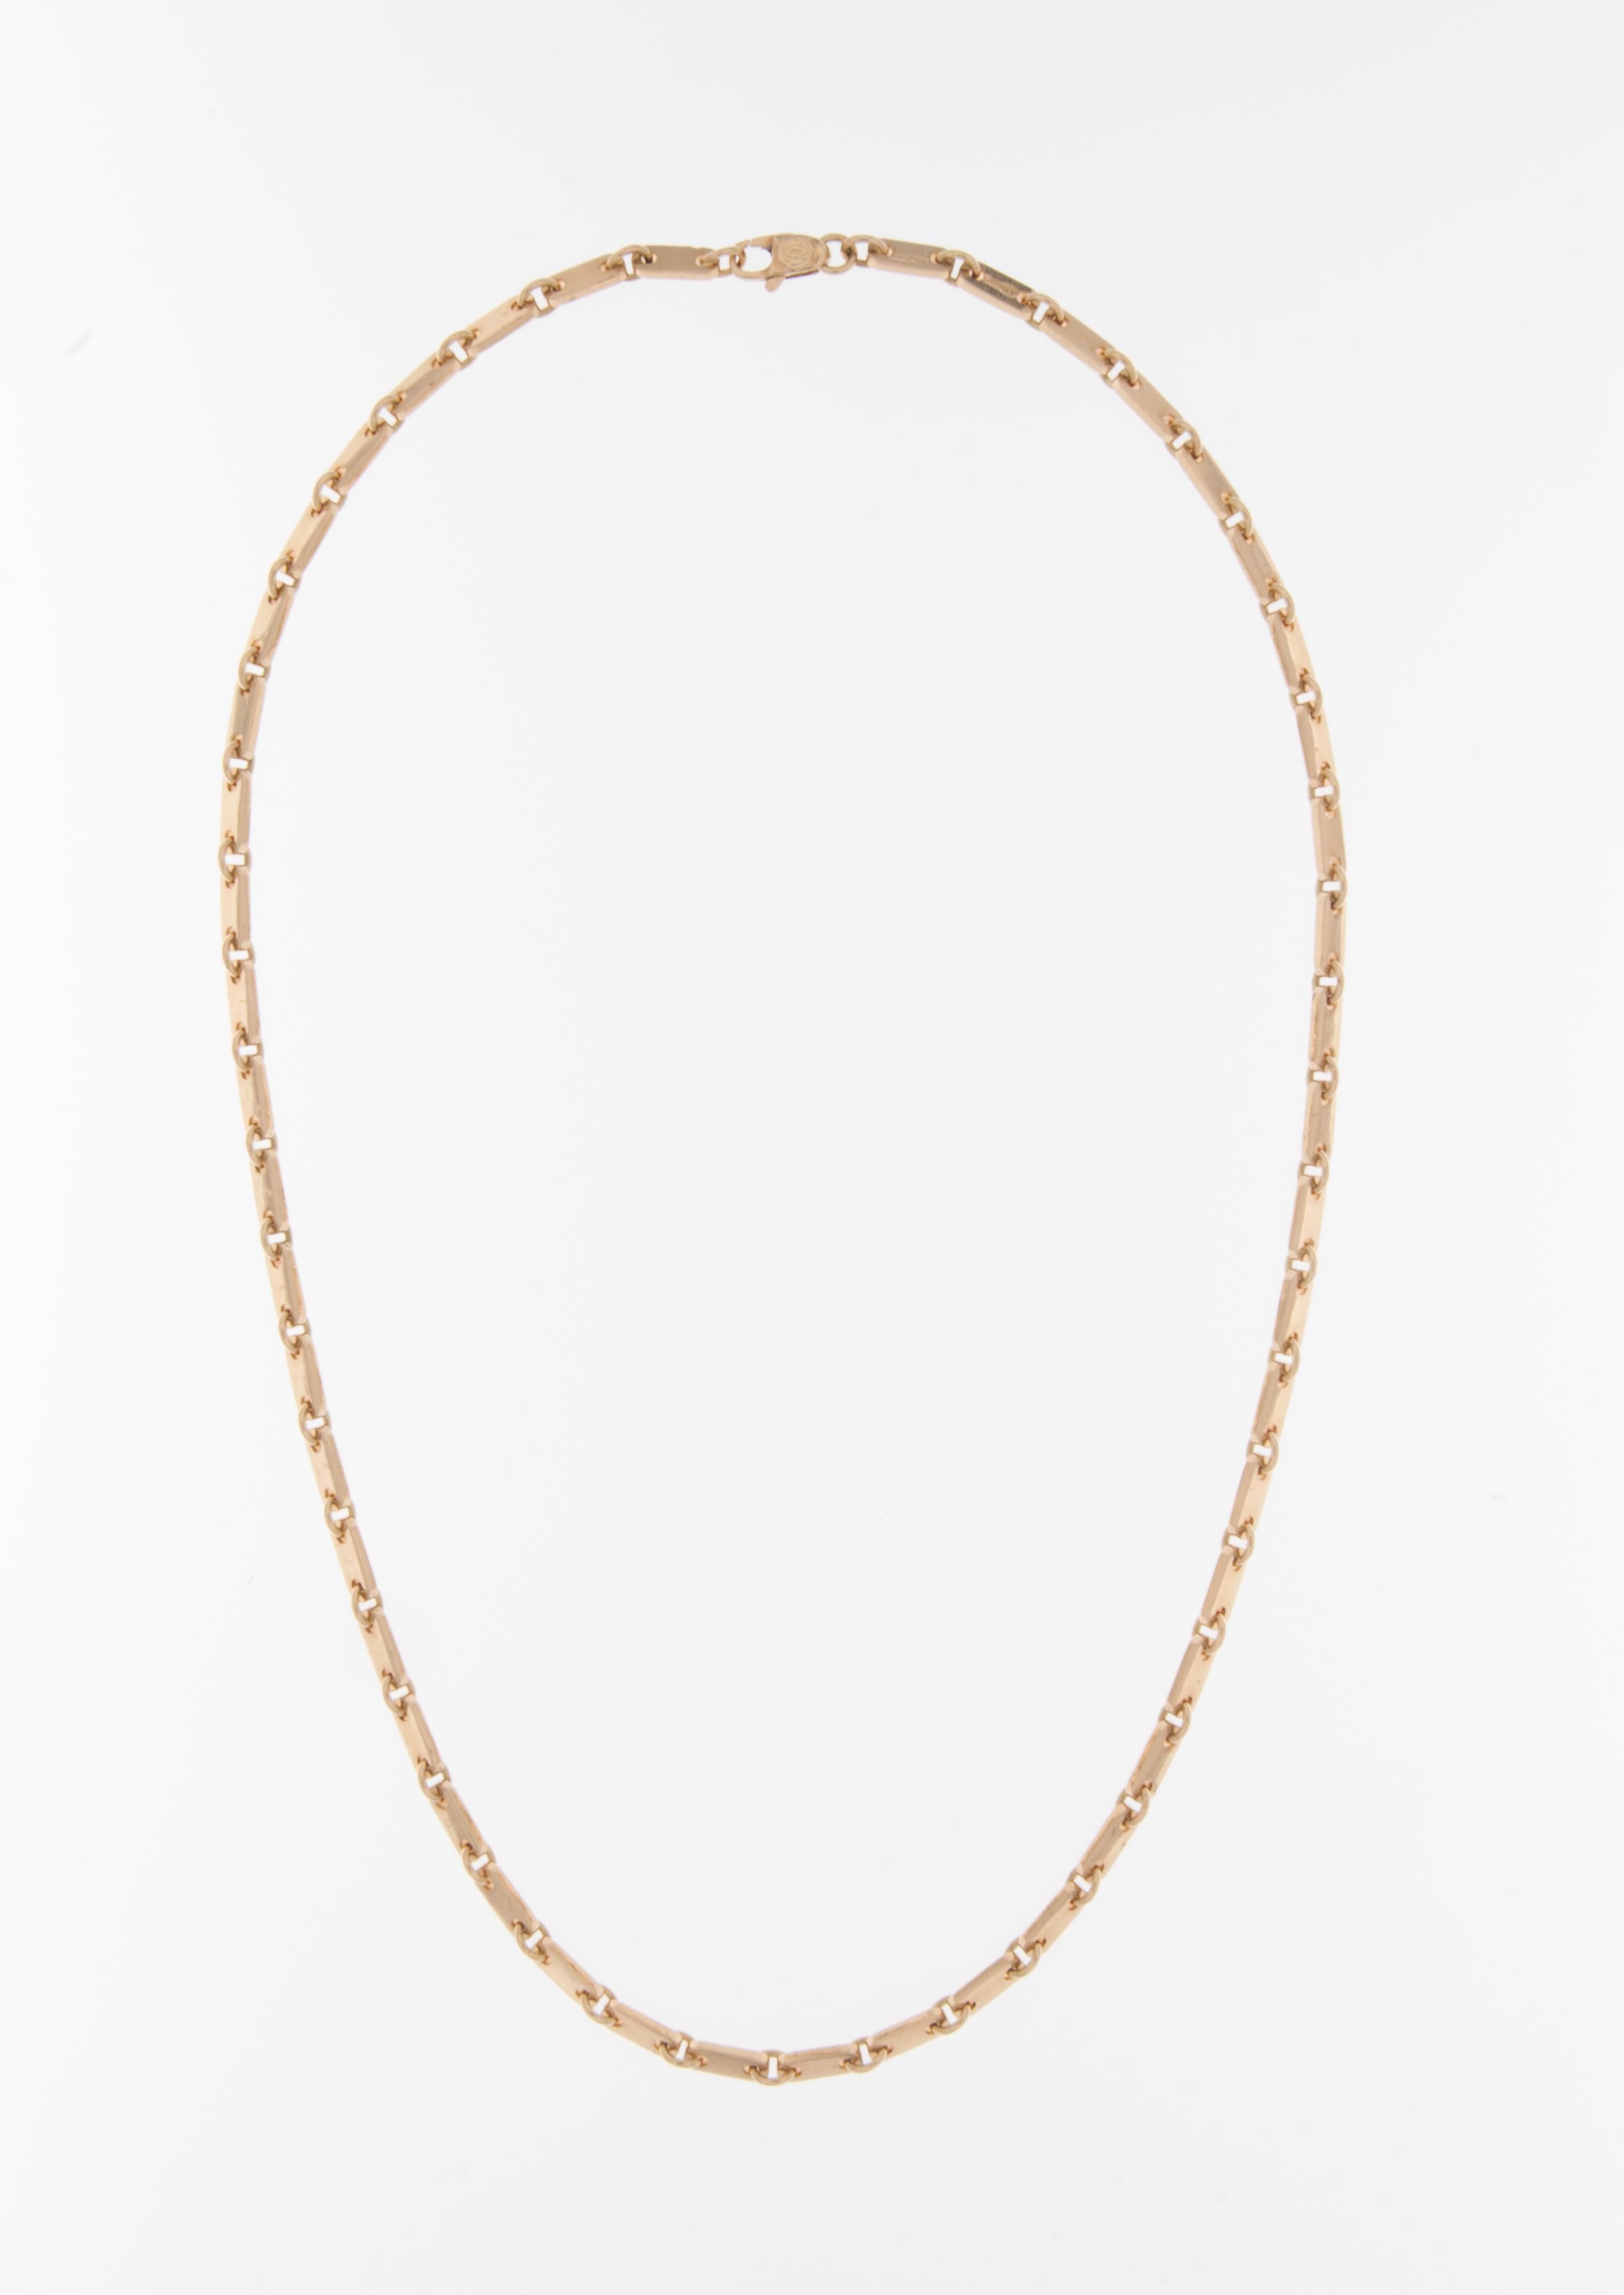 The Cartier 18-karat Yellow Gold Ingots Necklace is a stunning piece of jewelry created by the prestigious French luxury brand, Cartier. 

The necklace is crafted from 18-karat yellow gold, known for its lustrous and warm appearance. The use of